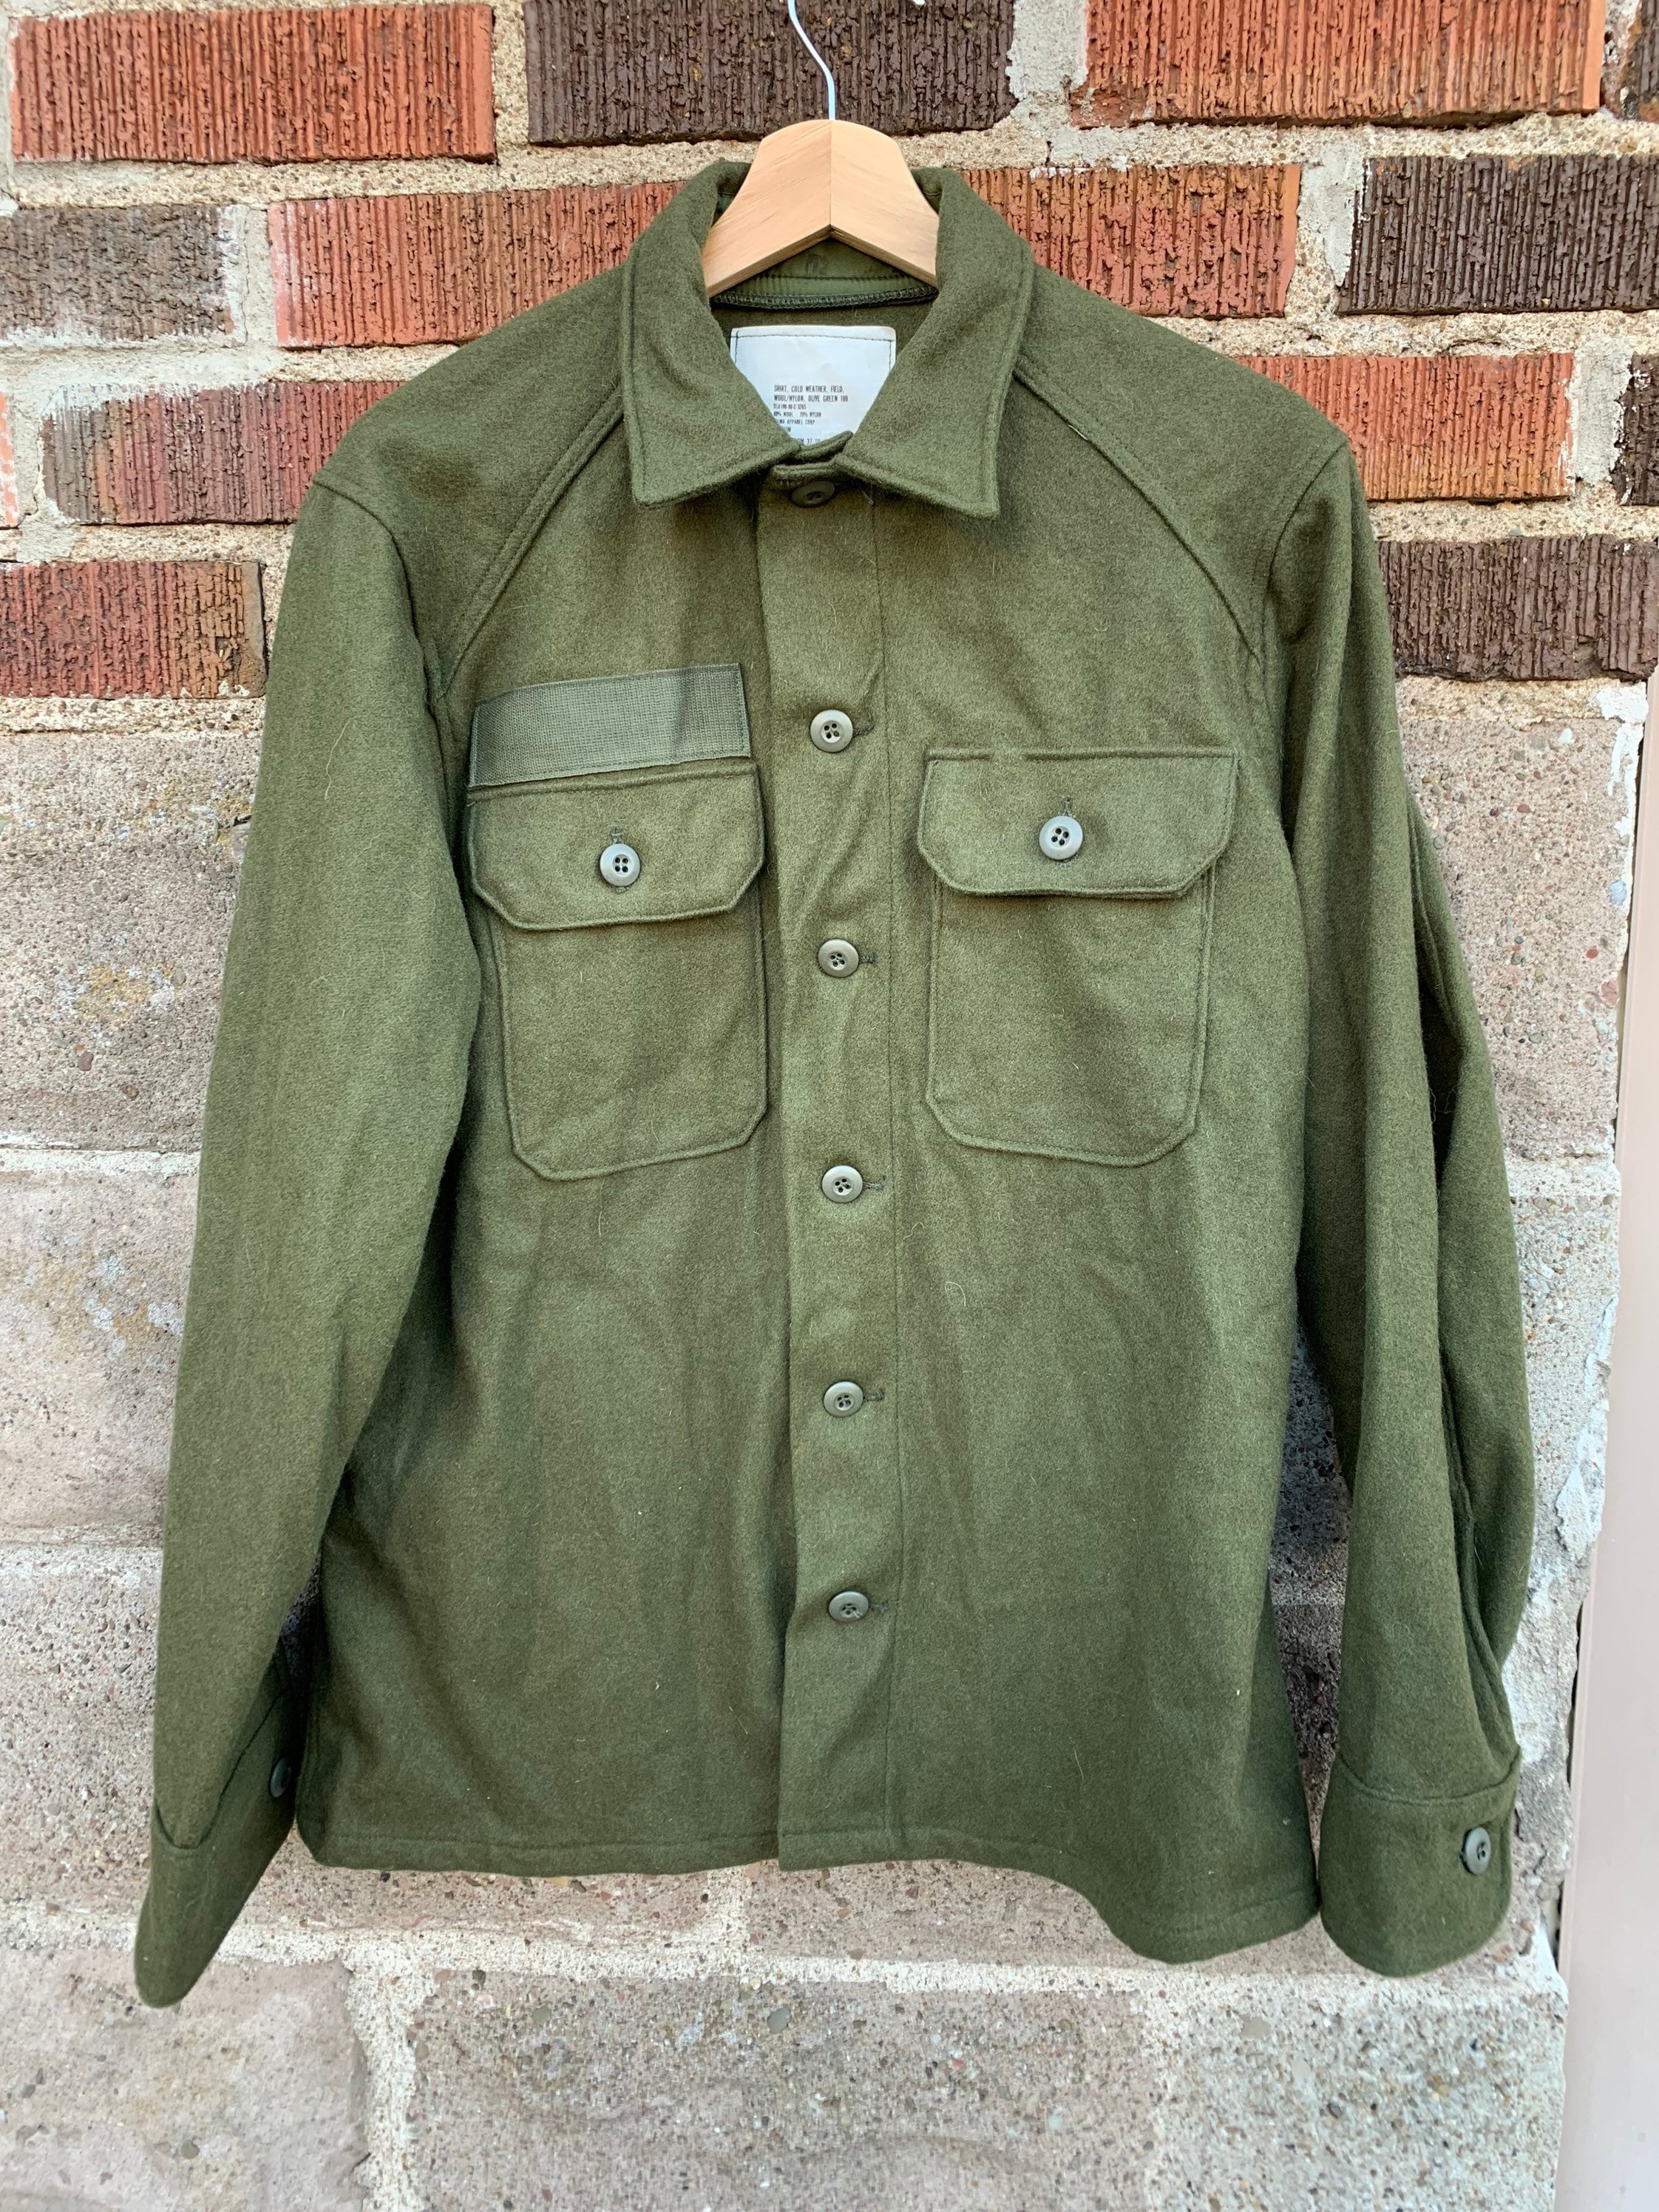 US Army Wool Shirt OG108 Cold Weather Field Shirt Size Medium | Etsy